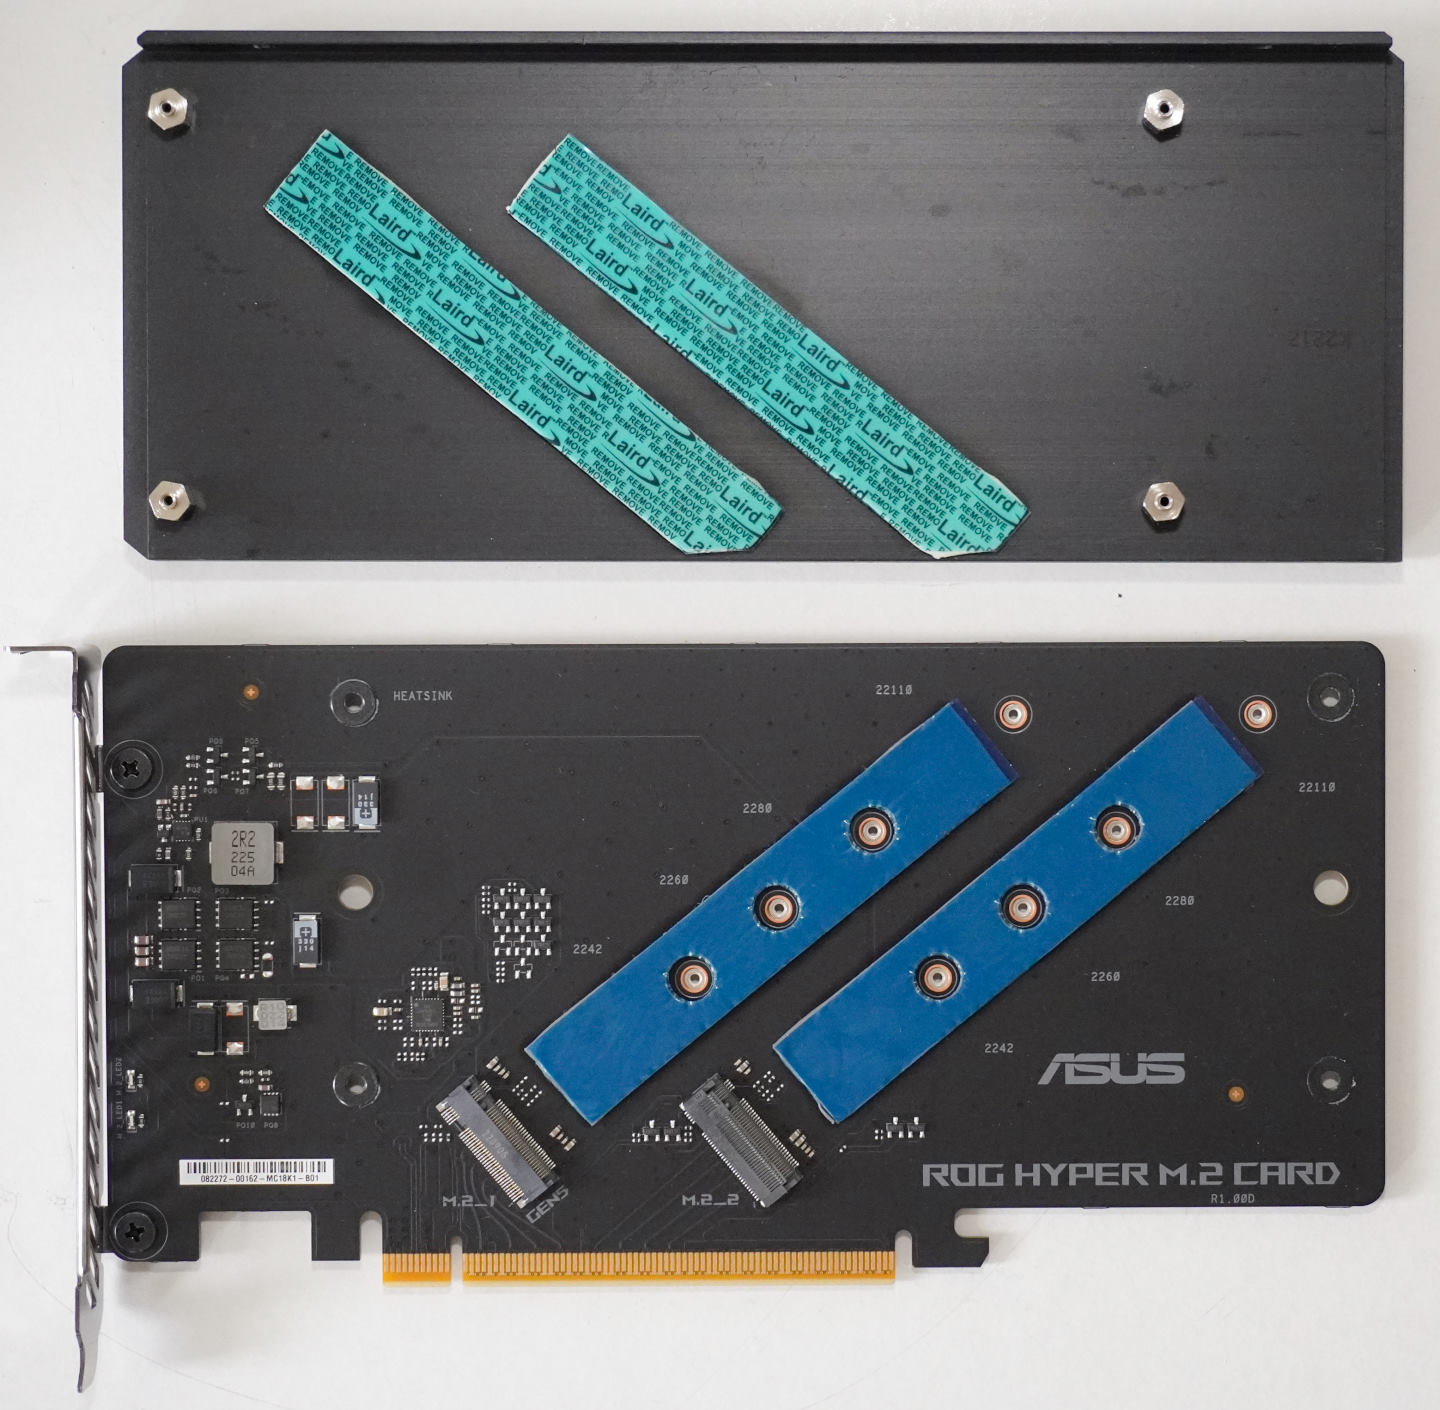 The ROG Hyper M.2 riser card has 2 M.2 slots, supporting PCIe Gen 5x4 and PCIe Gen 4x4 transmission modes respectively.